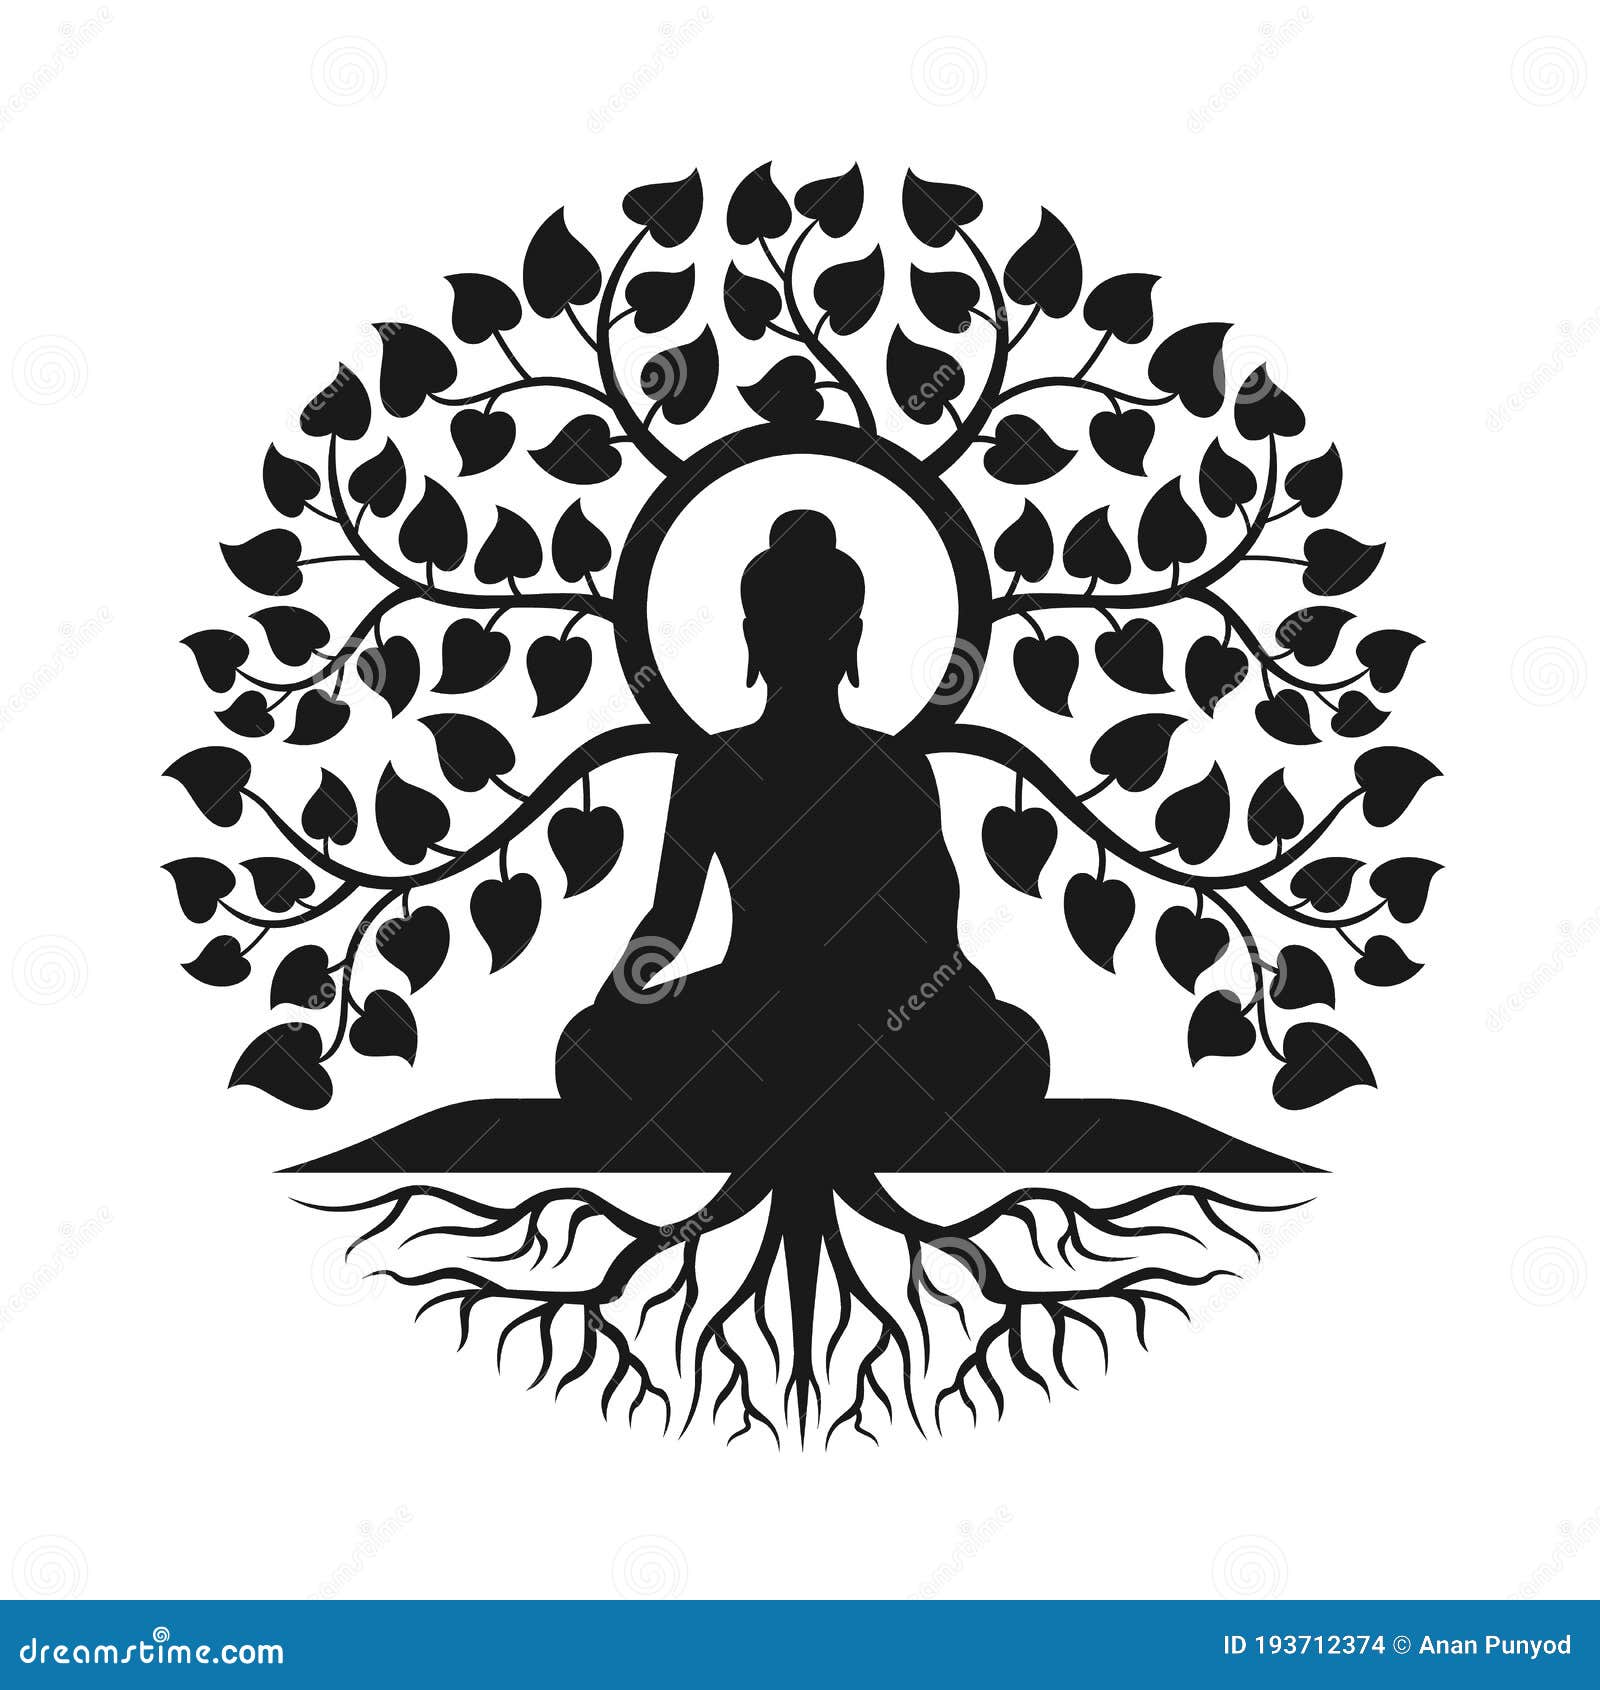 5,202 Black Buddha Drawing Images, Stock Photos & Vectors | Shutterstock